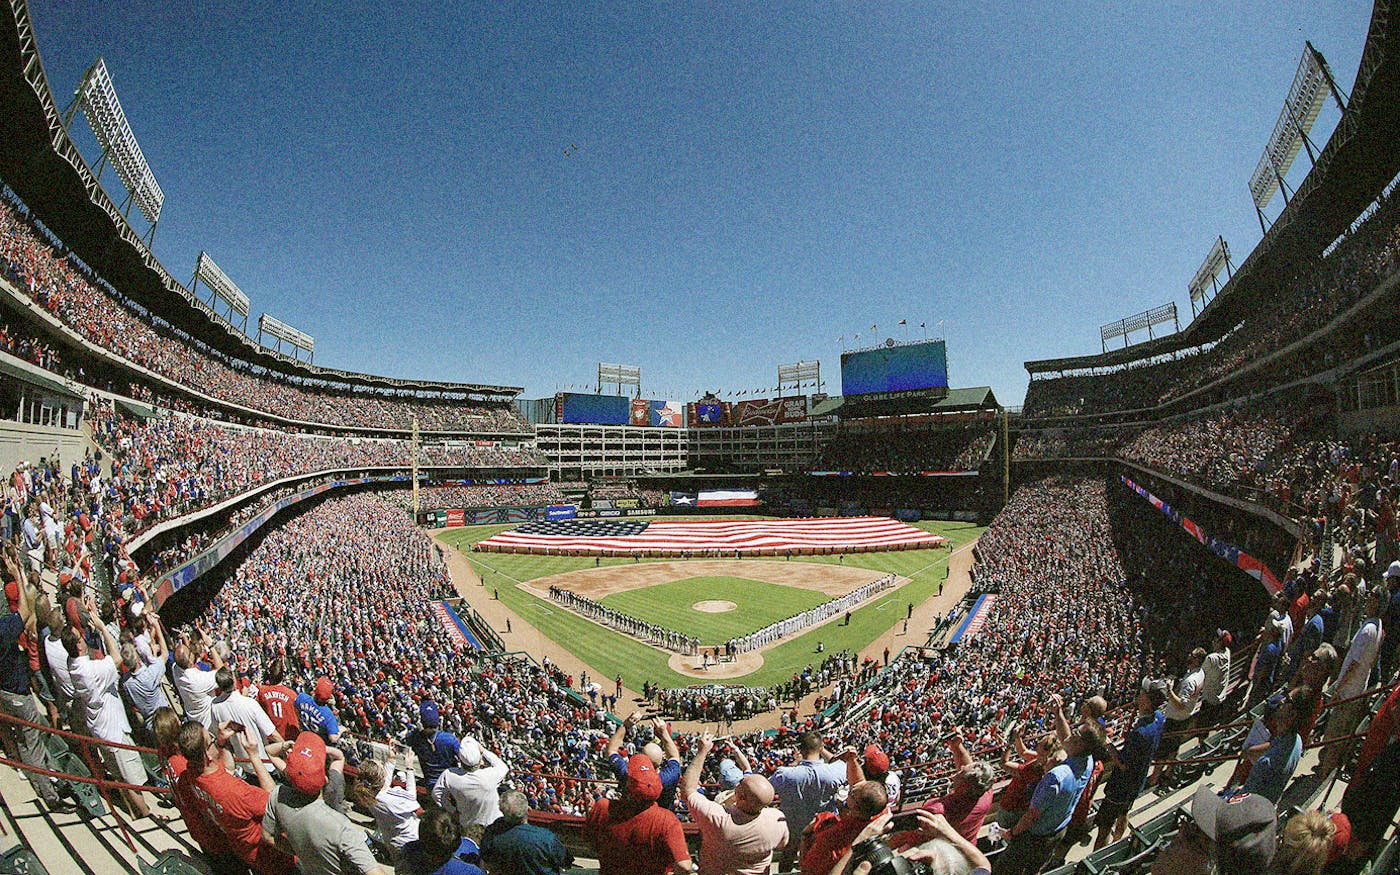 Globe Life Park - history, photos and more of the Texas Rangers